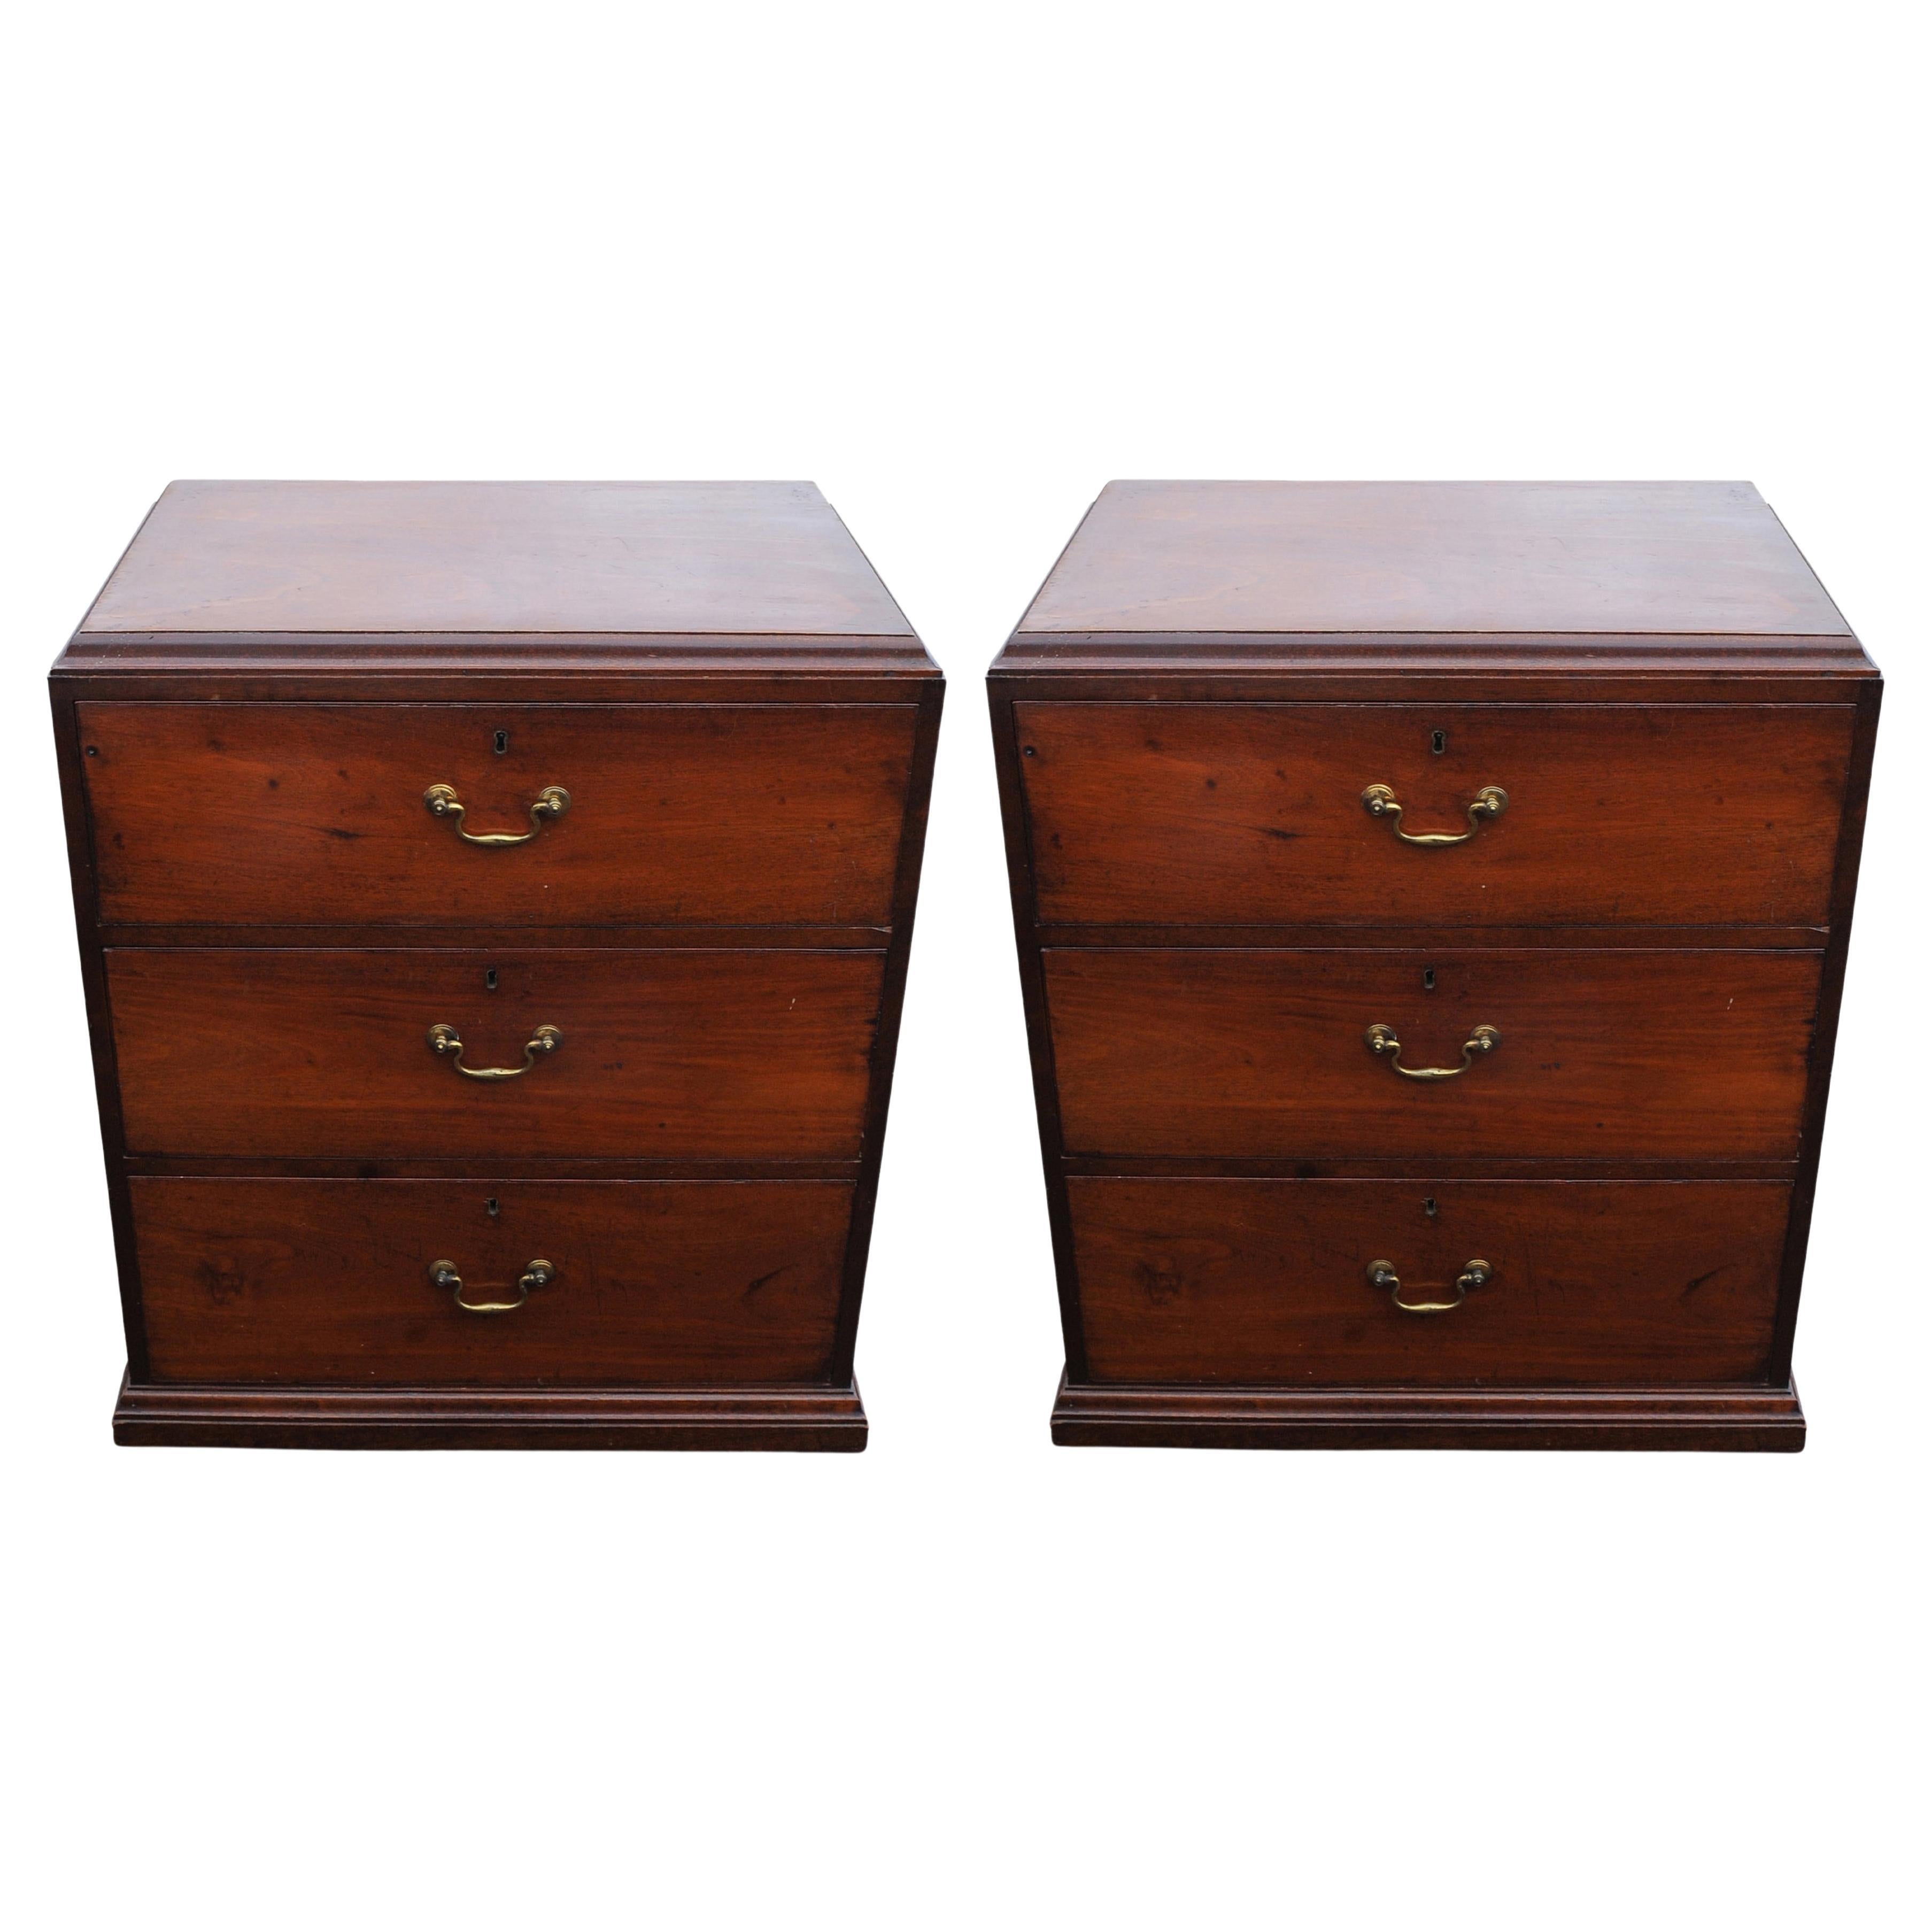 A Pair of Georgian Three Drawer Bedside Chests With Brass Handles & Handmade Dovetails

 